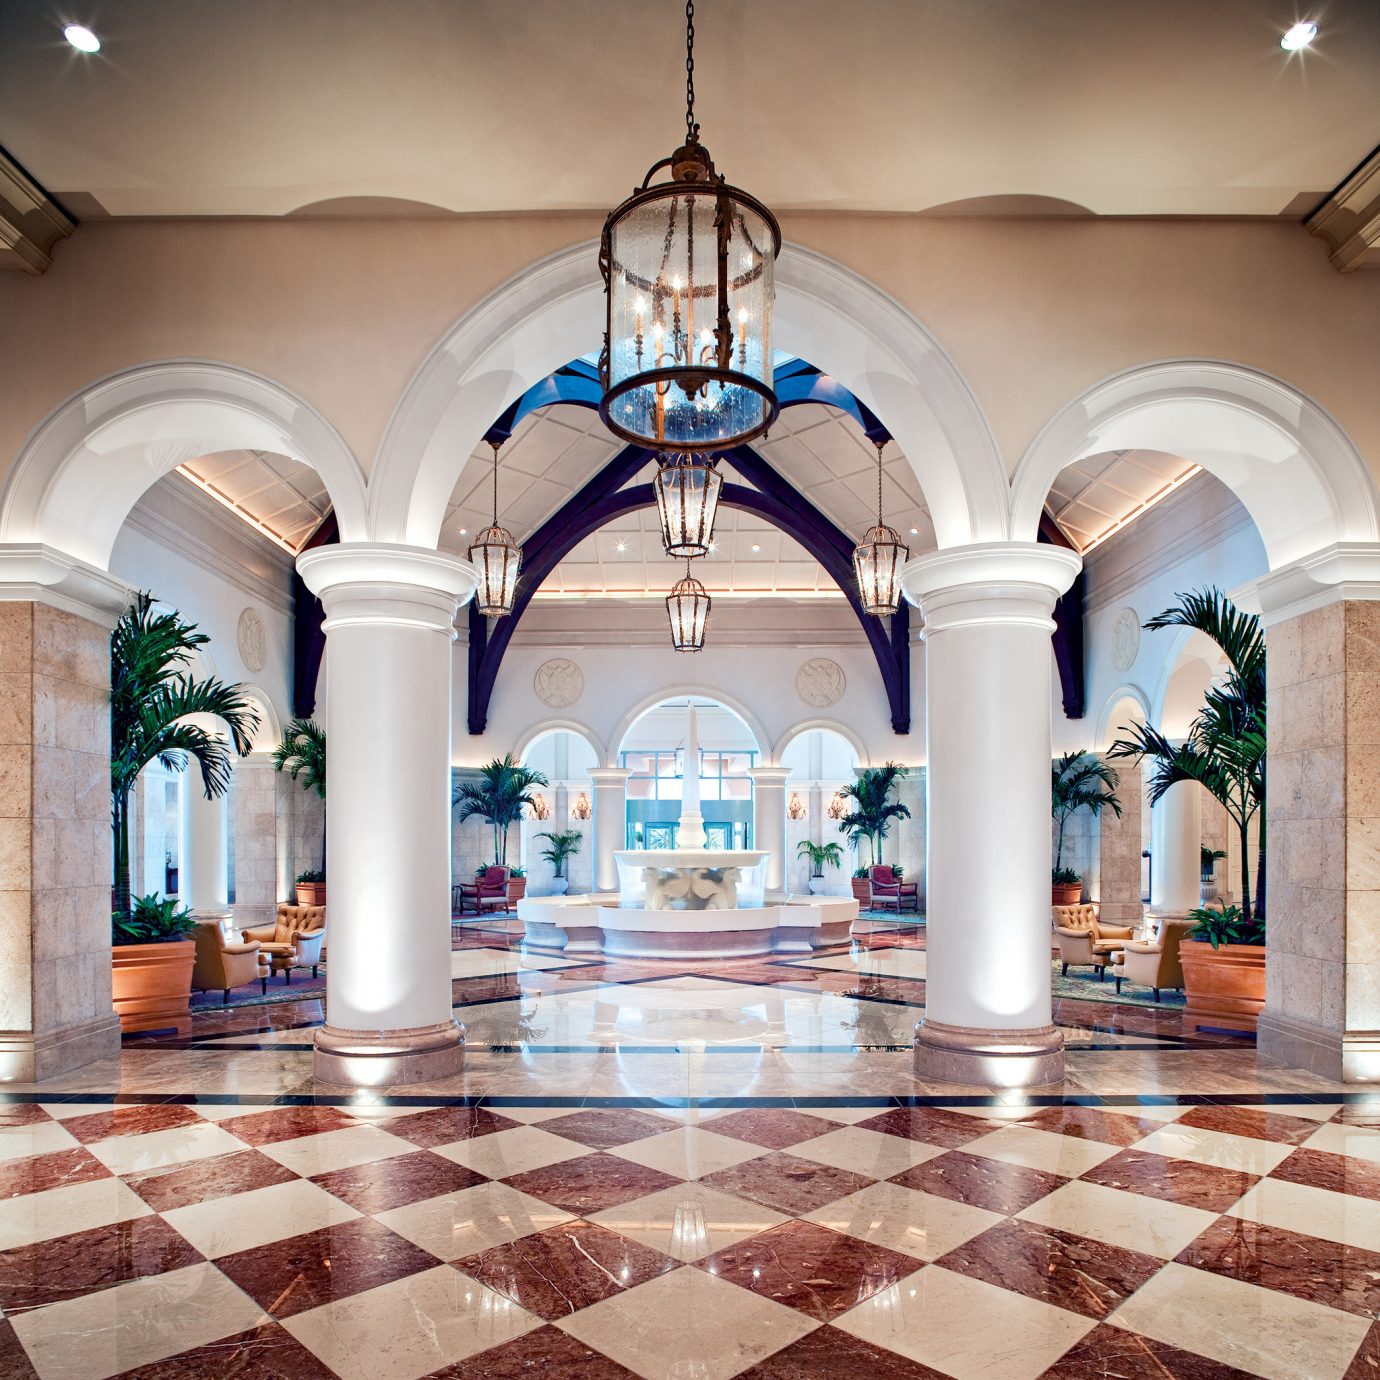 Lobby Architecture mansion arch column palace ballroom tile tiled colonnade